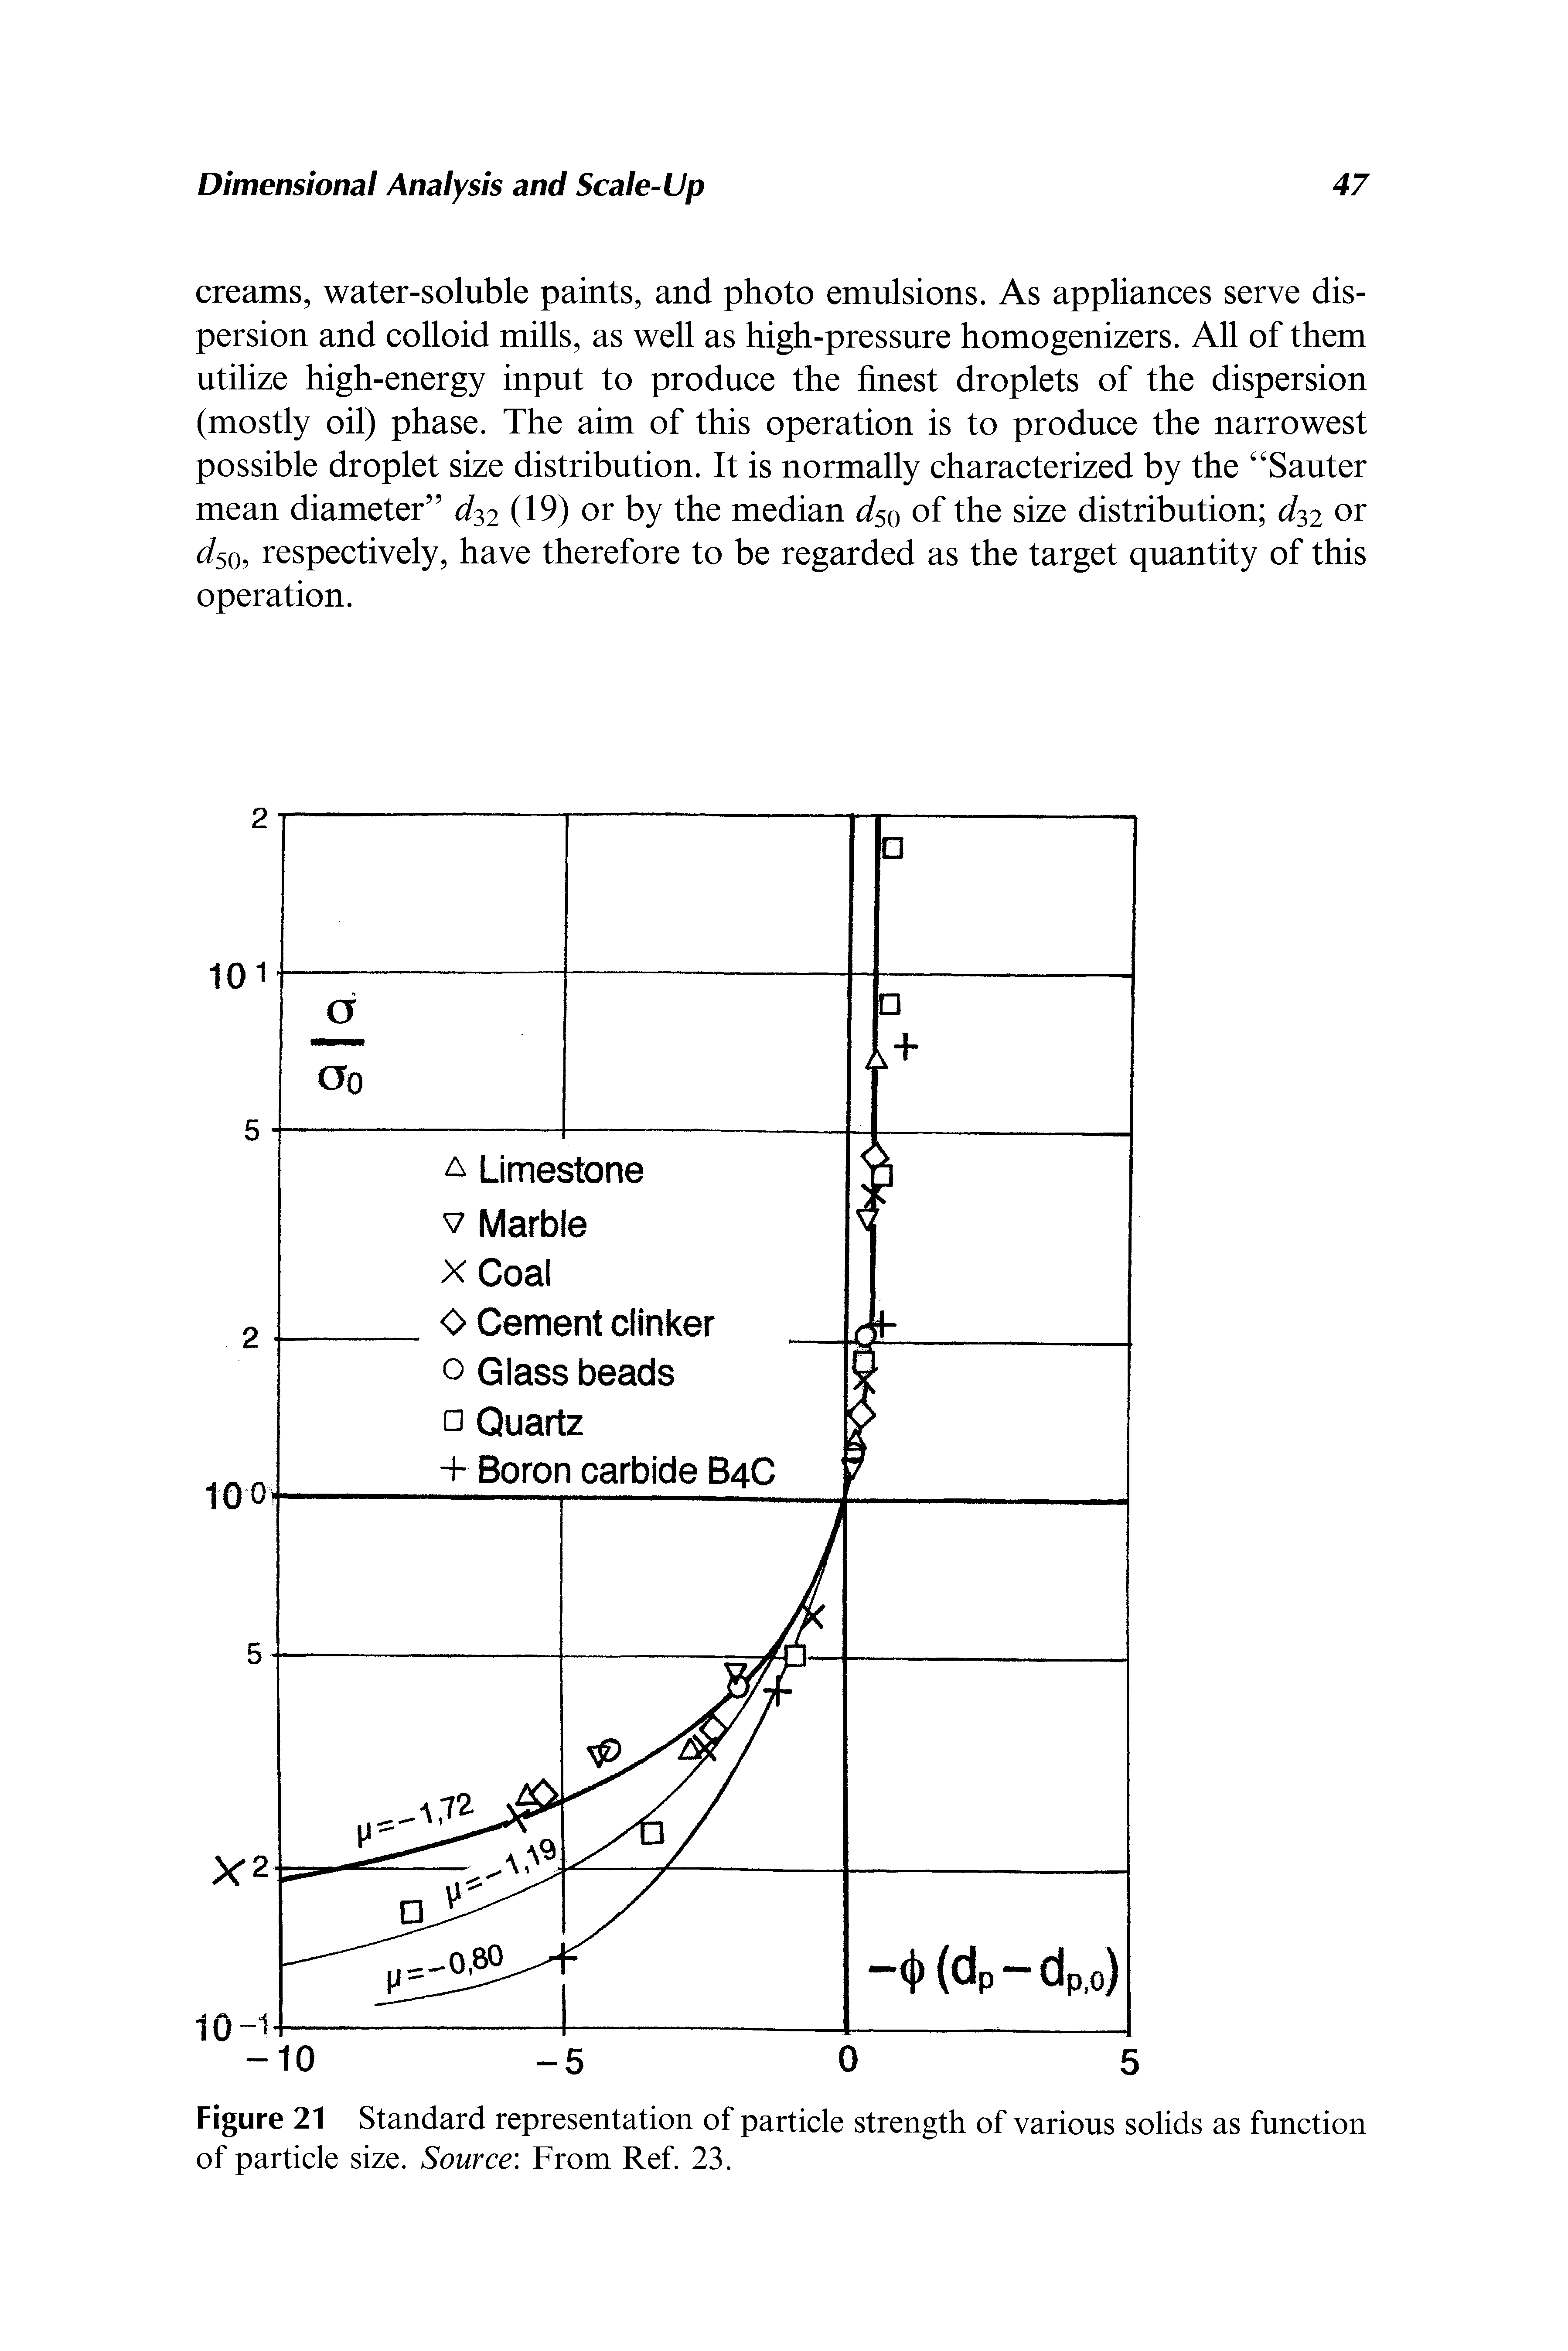 Figure 21 Standard representation of particle strength of various solids as function of particle size. Source From Ref. 23.